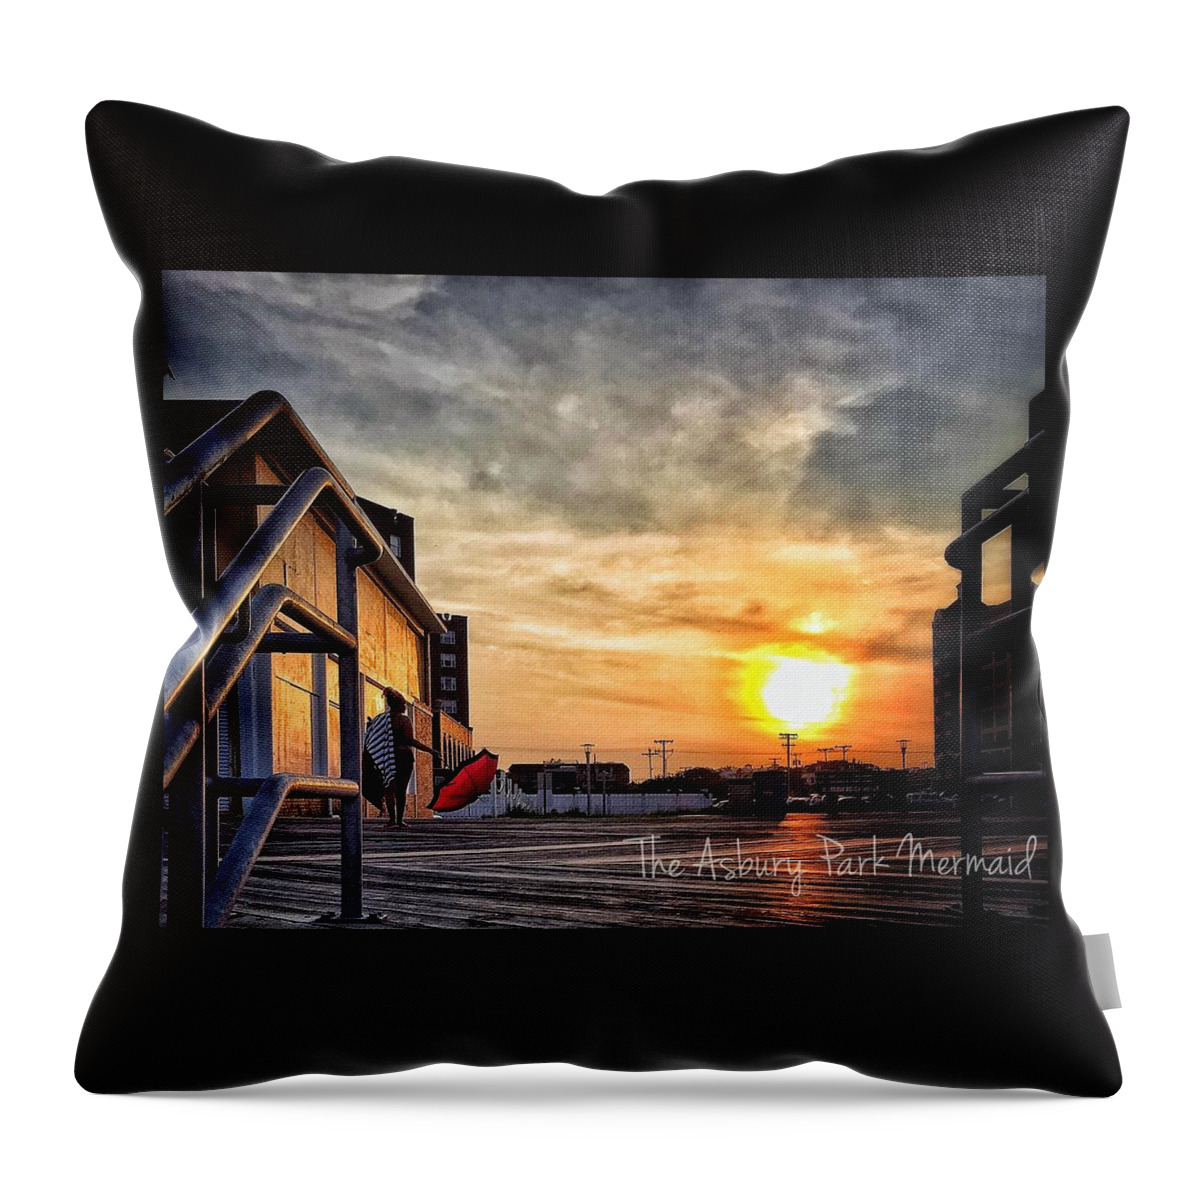 Asbury Park Throw Pillow featuring the photograph Endless Summer in Asbury Park by The Asbury Park Mermaid